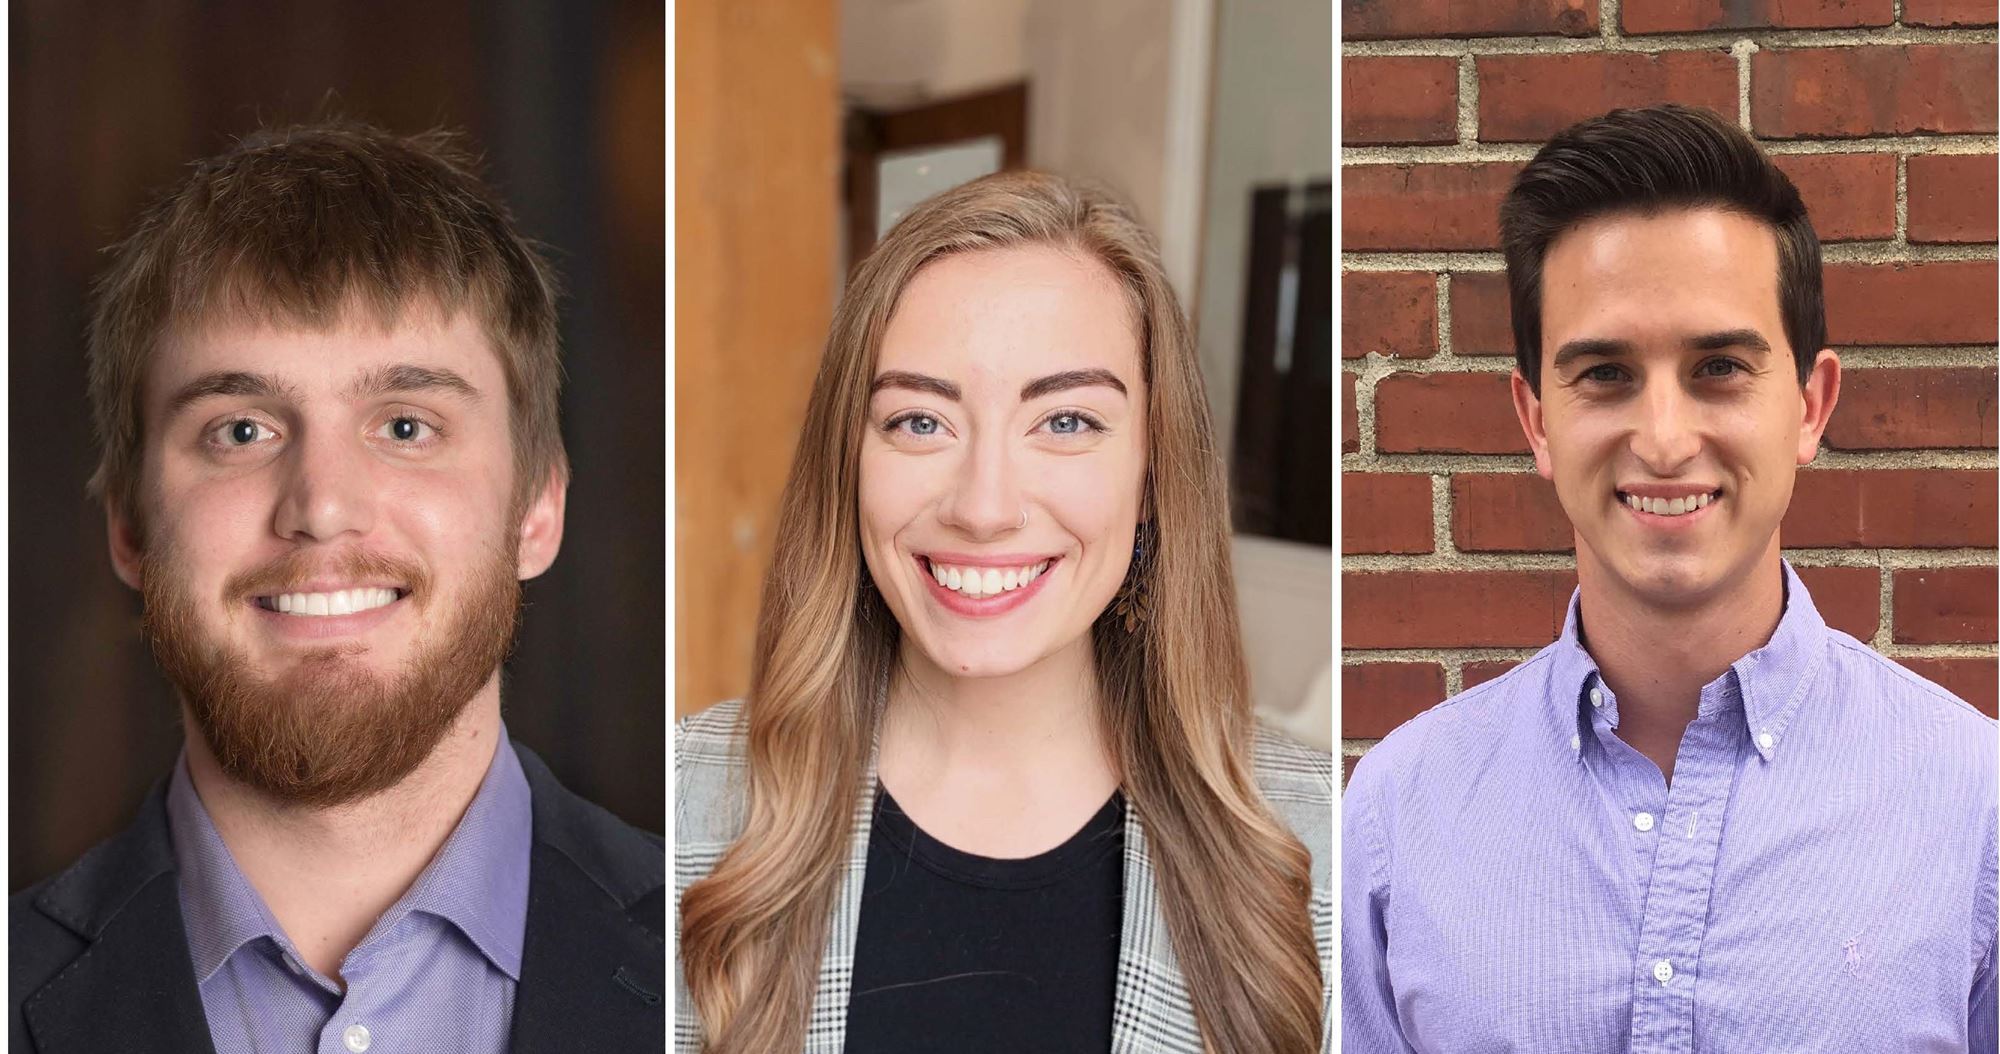 Confluence Welcomes Calvin, Casey and Avery